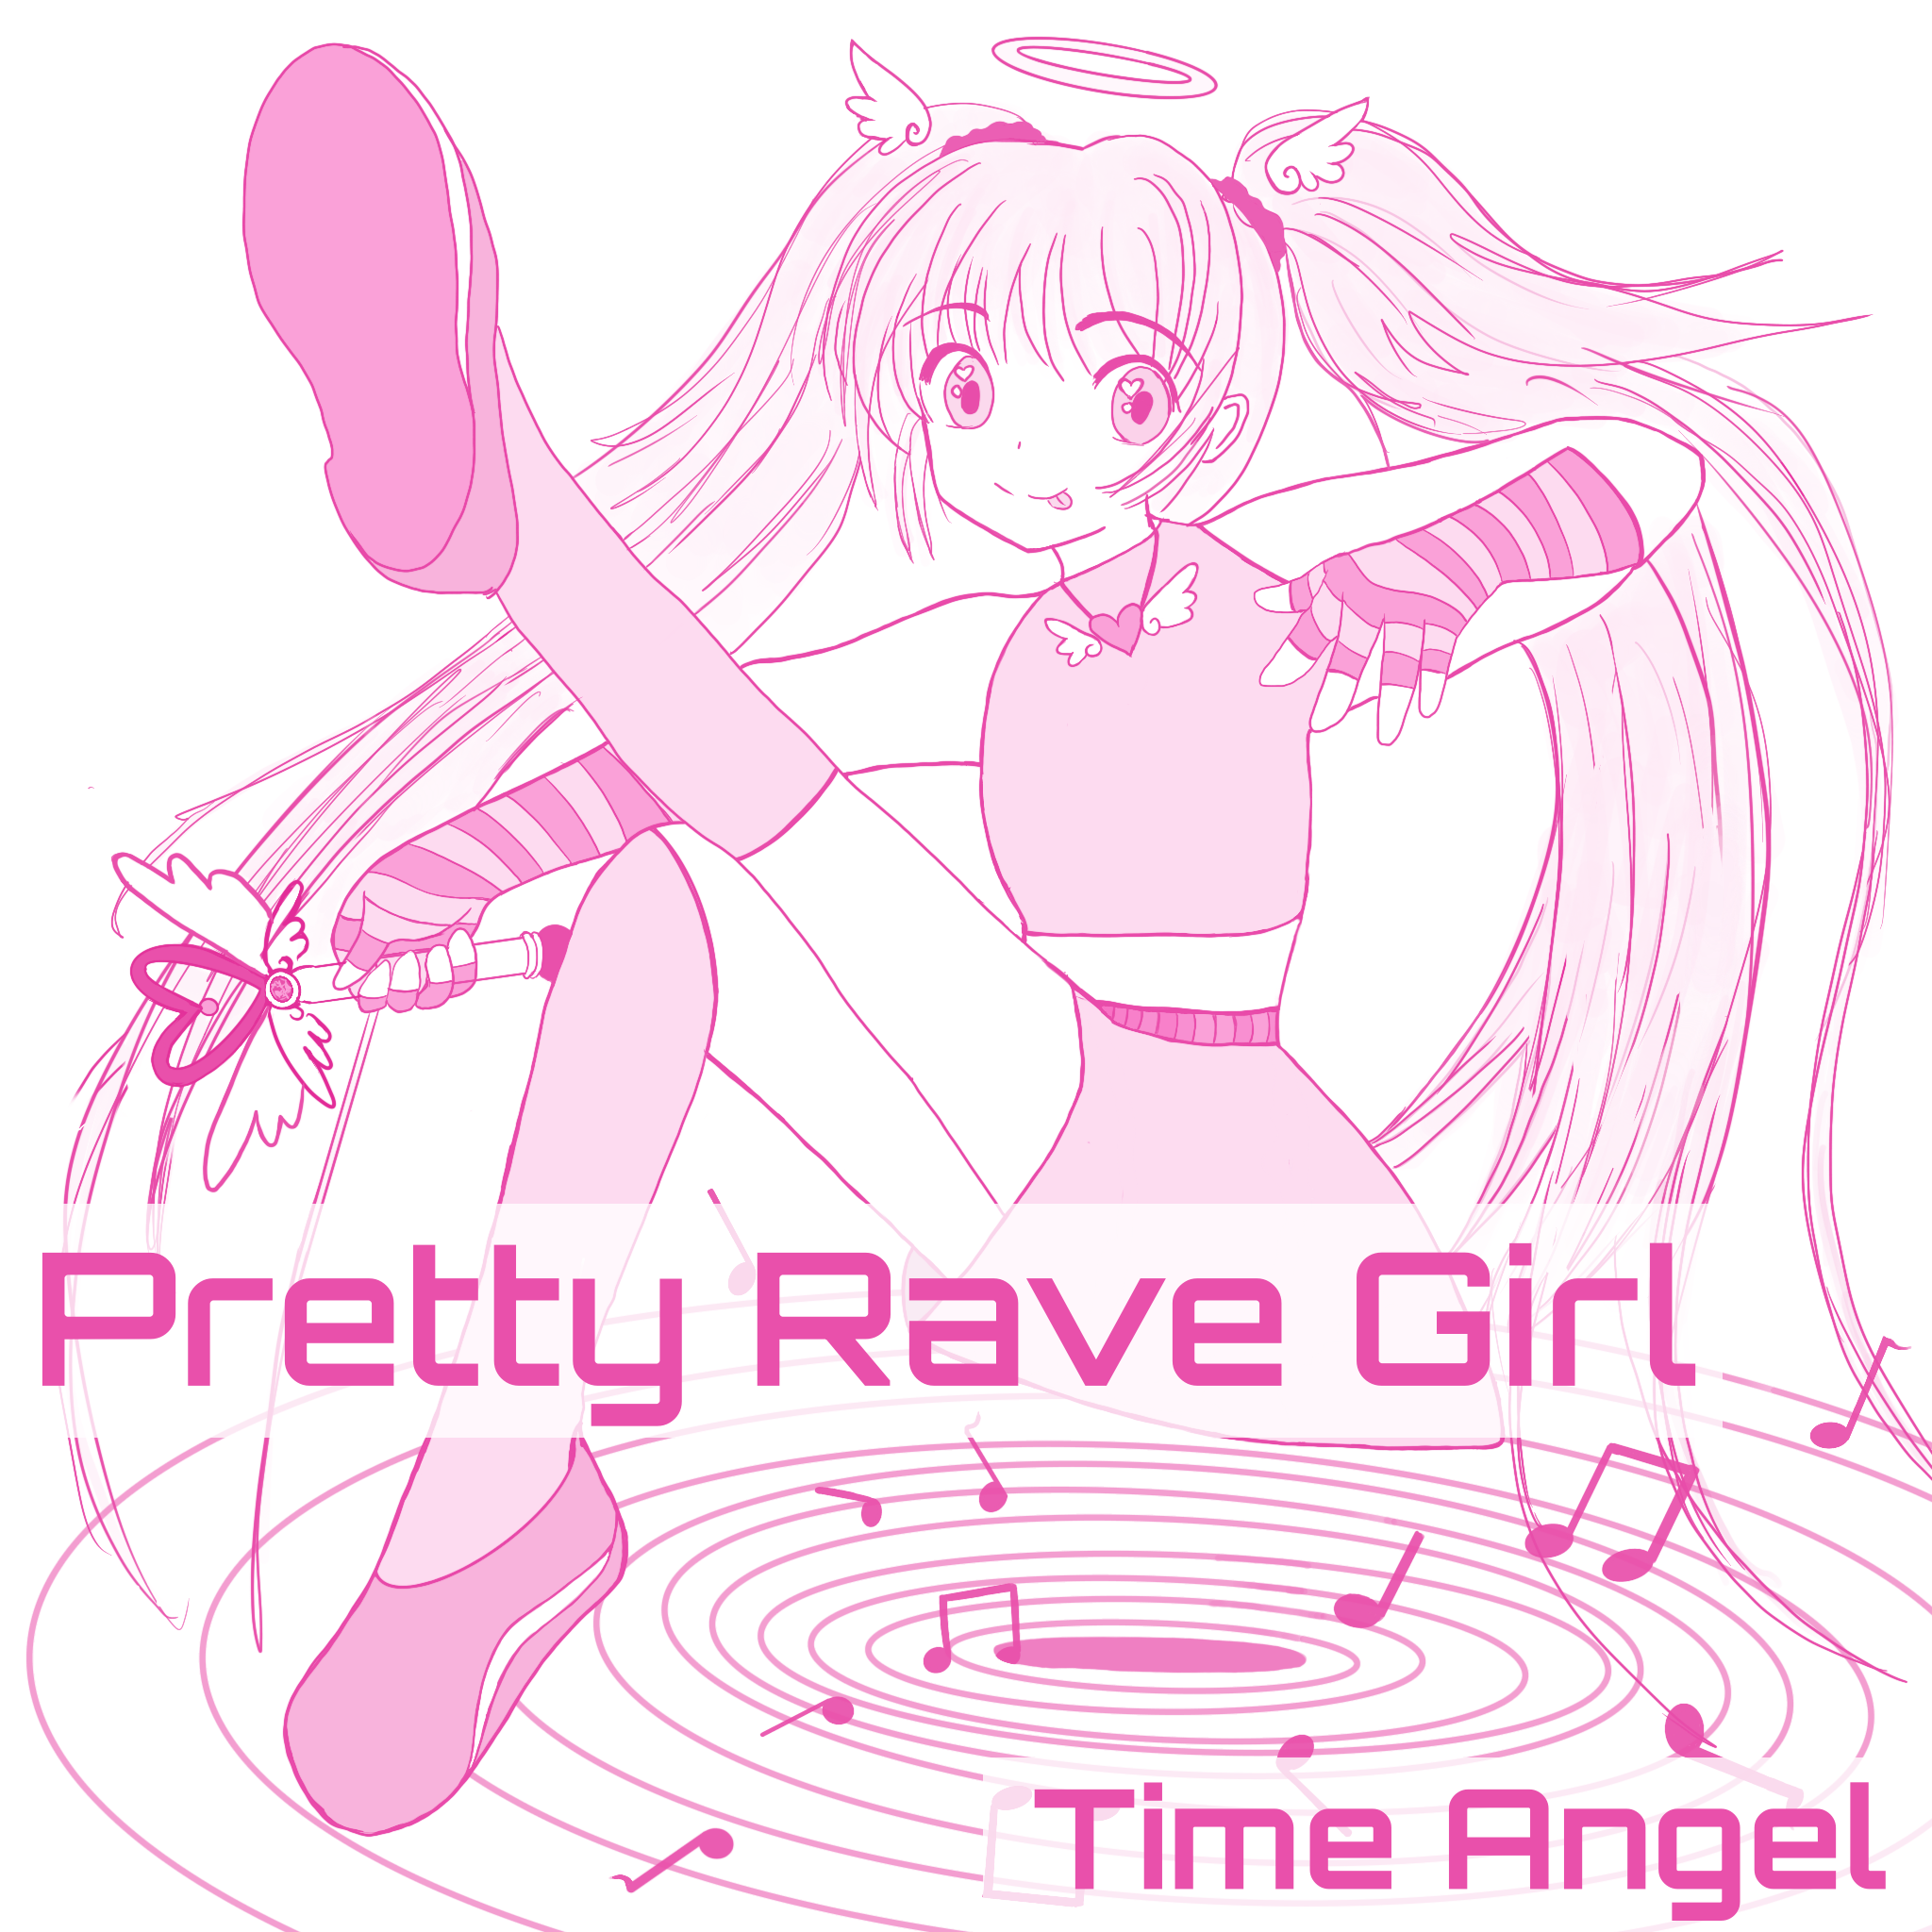 Album art for Pretty Rave Girl. There is a cute anime girl holding a magic stick and entranced by rave music.